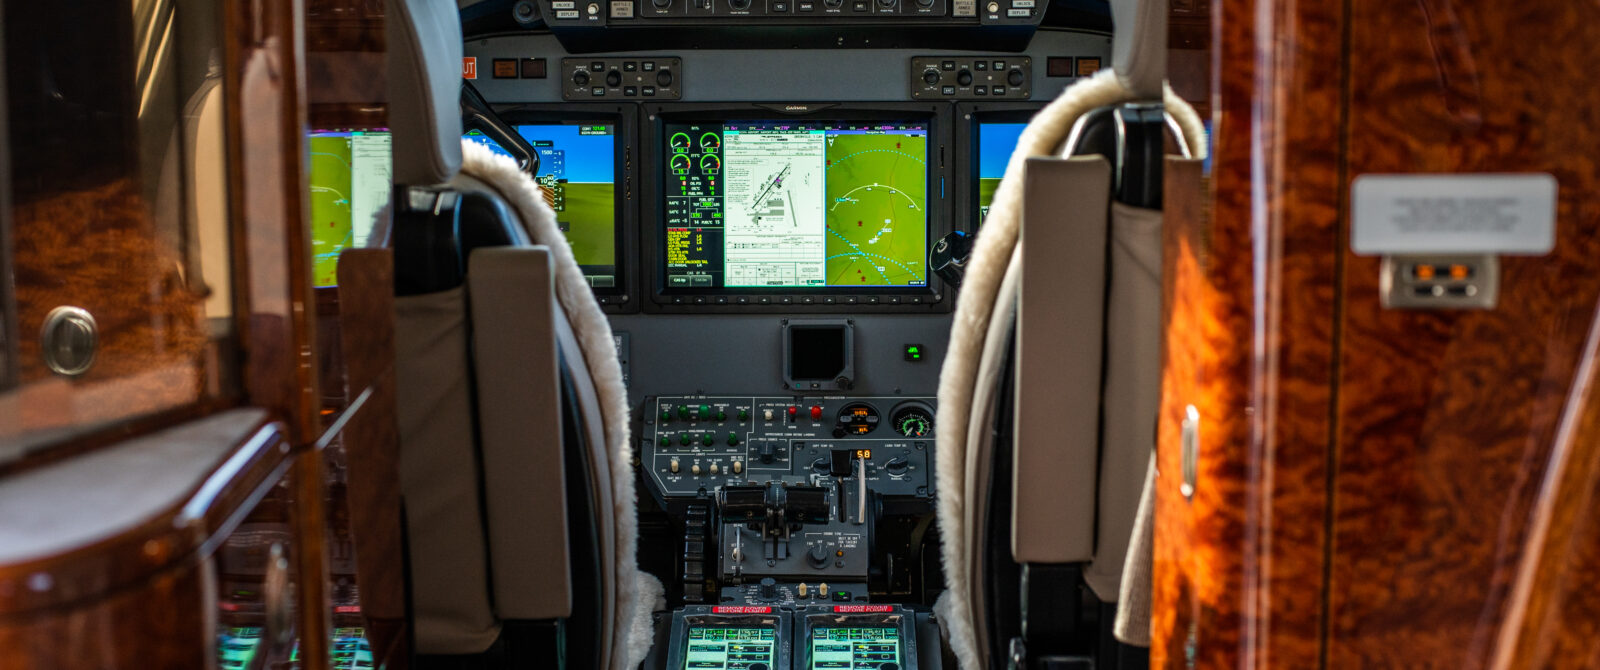 Cockpit and avionics in a private jet